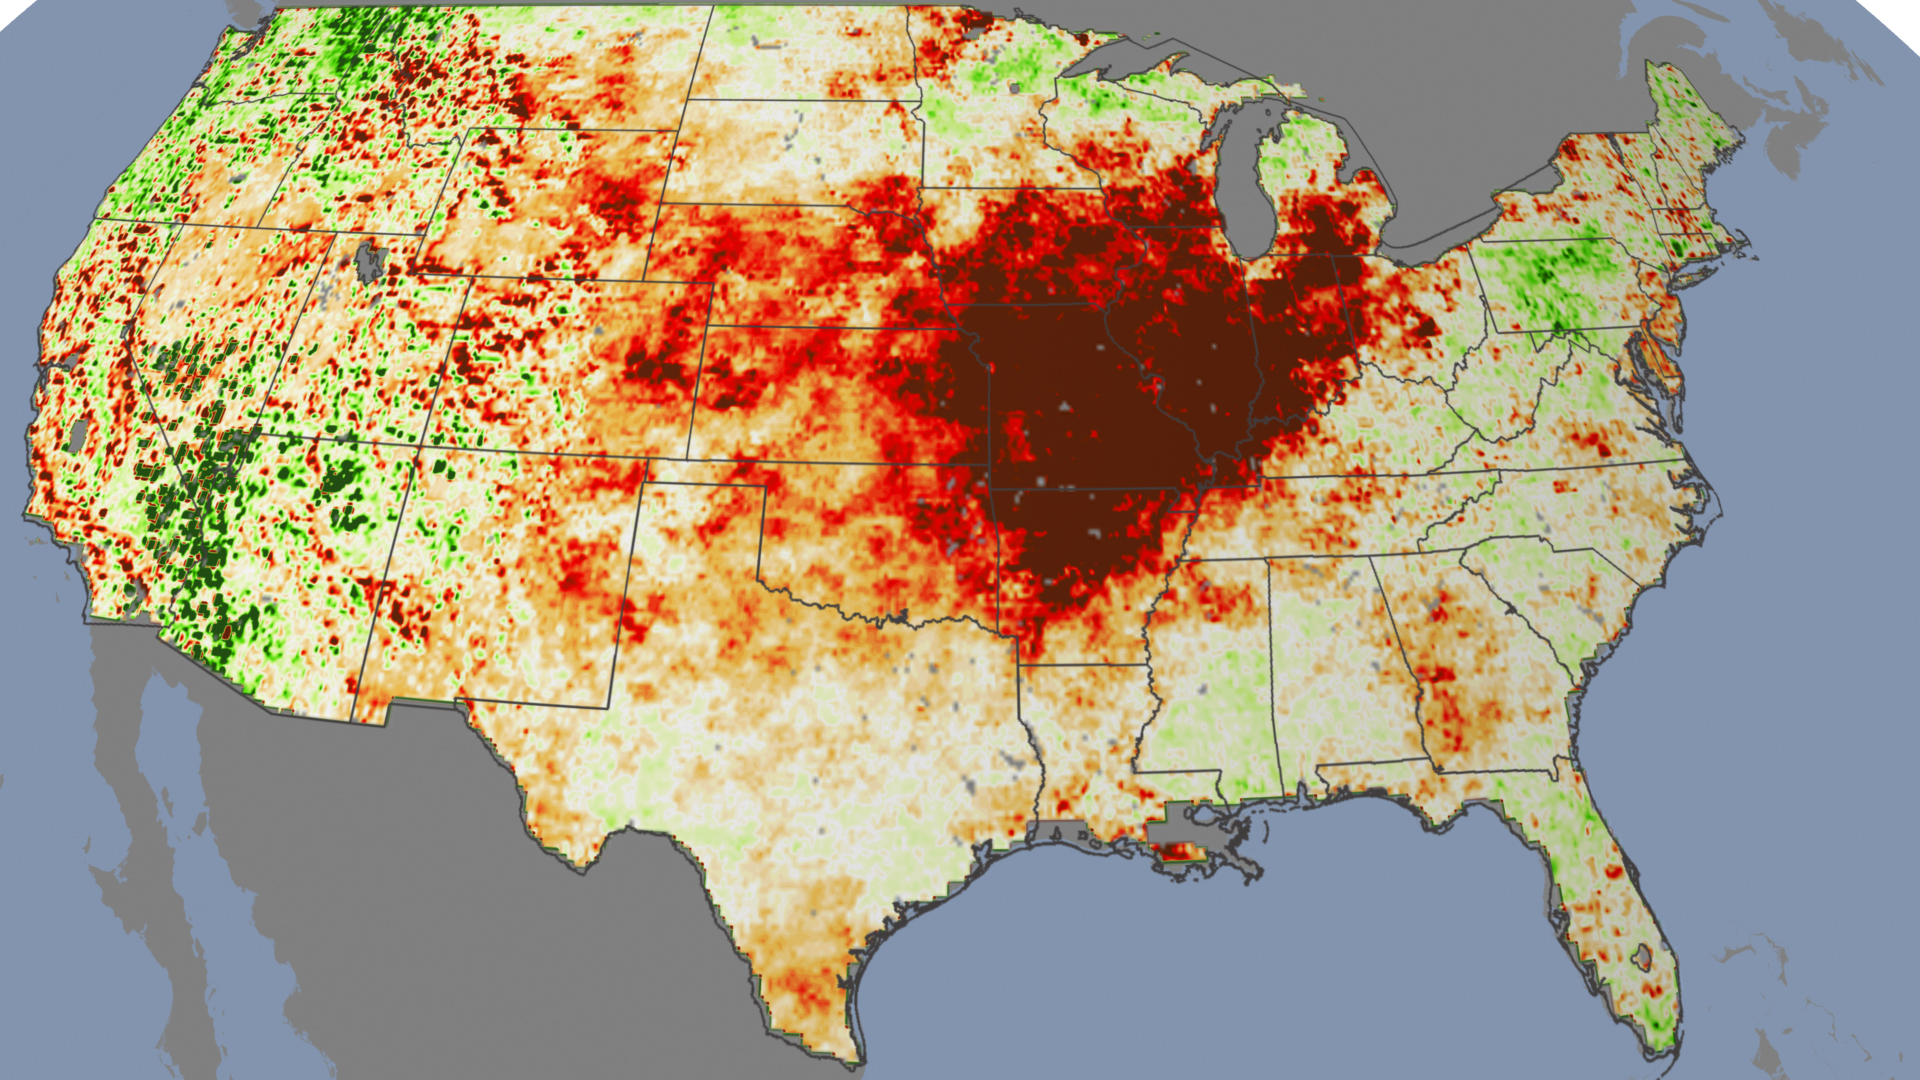 drought map showing deep rust stain across the midwest, darkest across the Mississippi valley ›